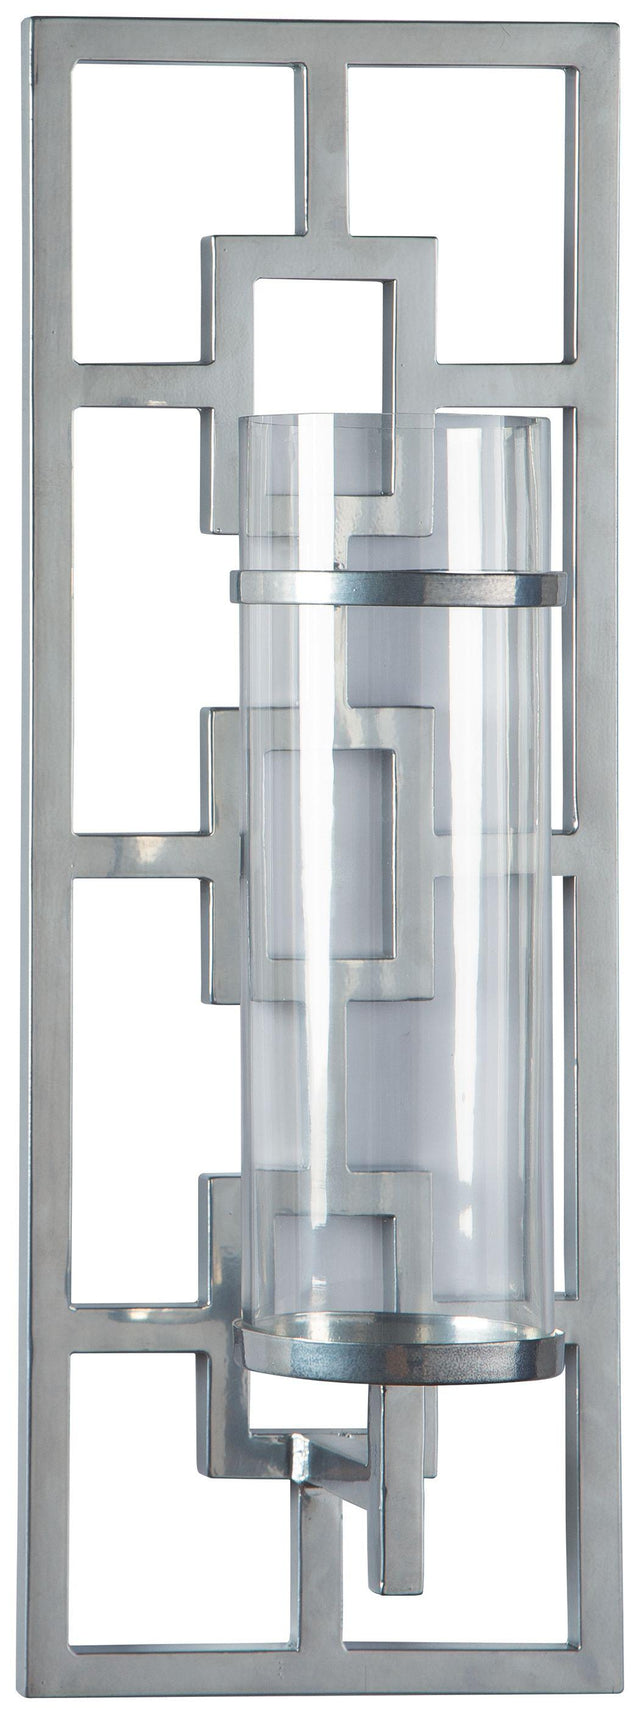 Ashley Brede Wall Sconce - Silver Finish